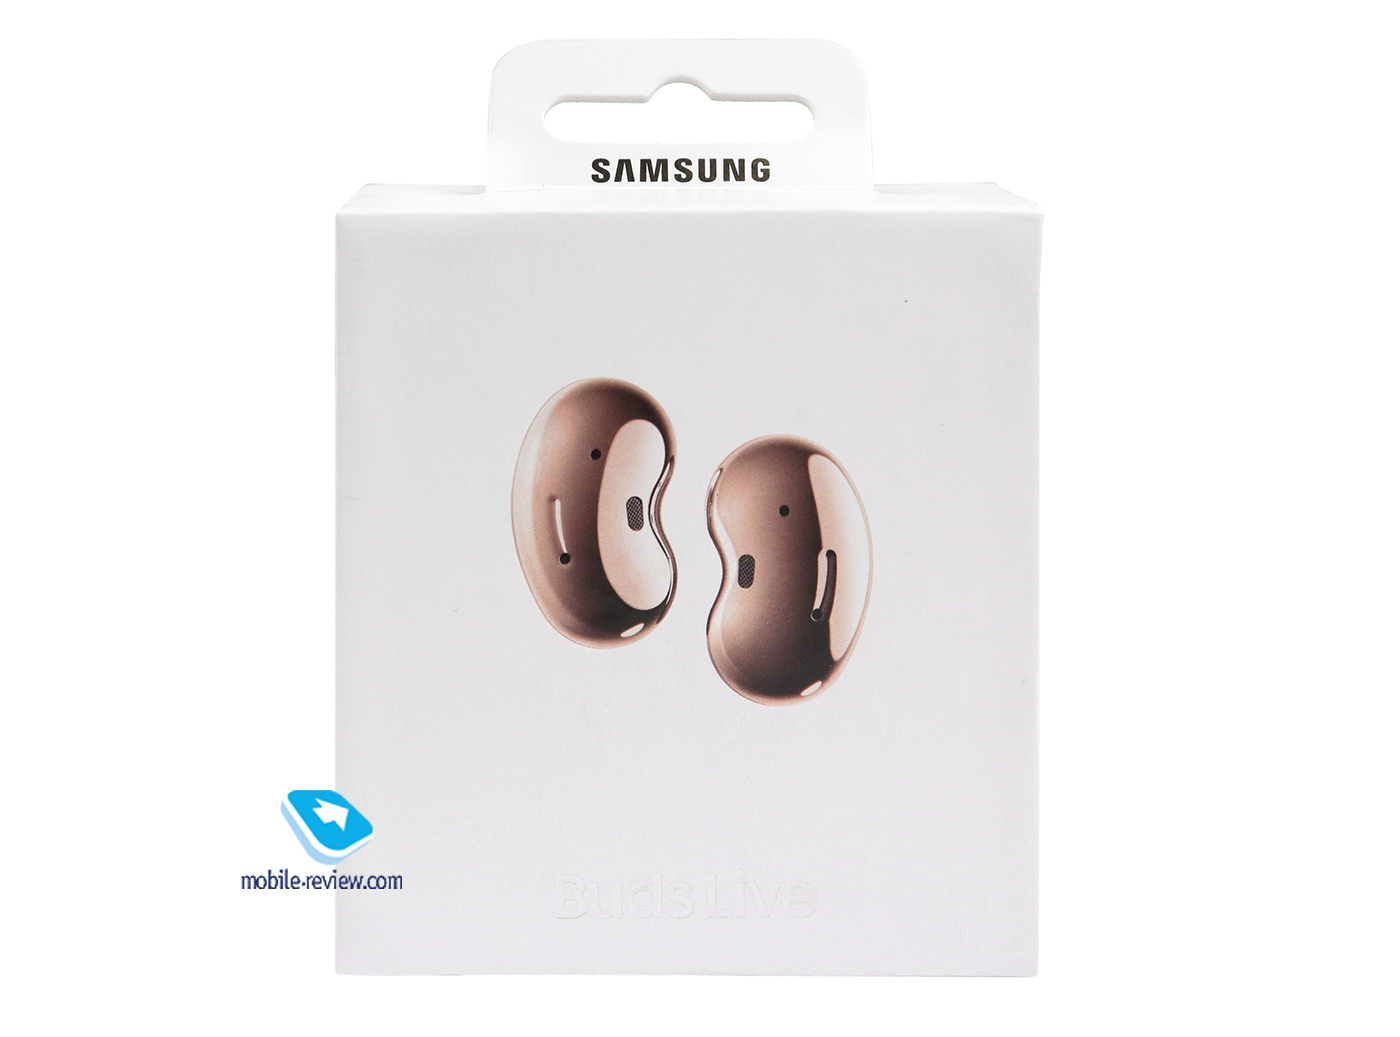 Samsung Galaxy Buds Live (SM-R180) TWS Noise Canceling Headphones Review